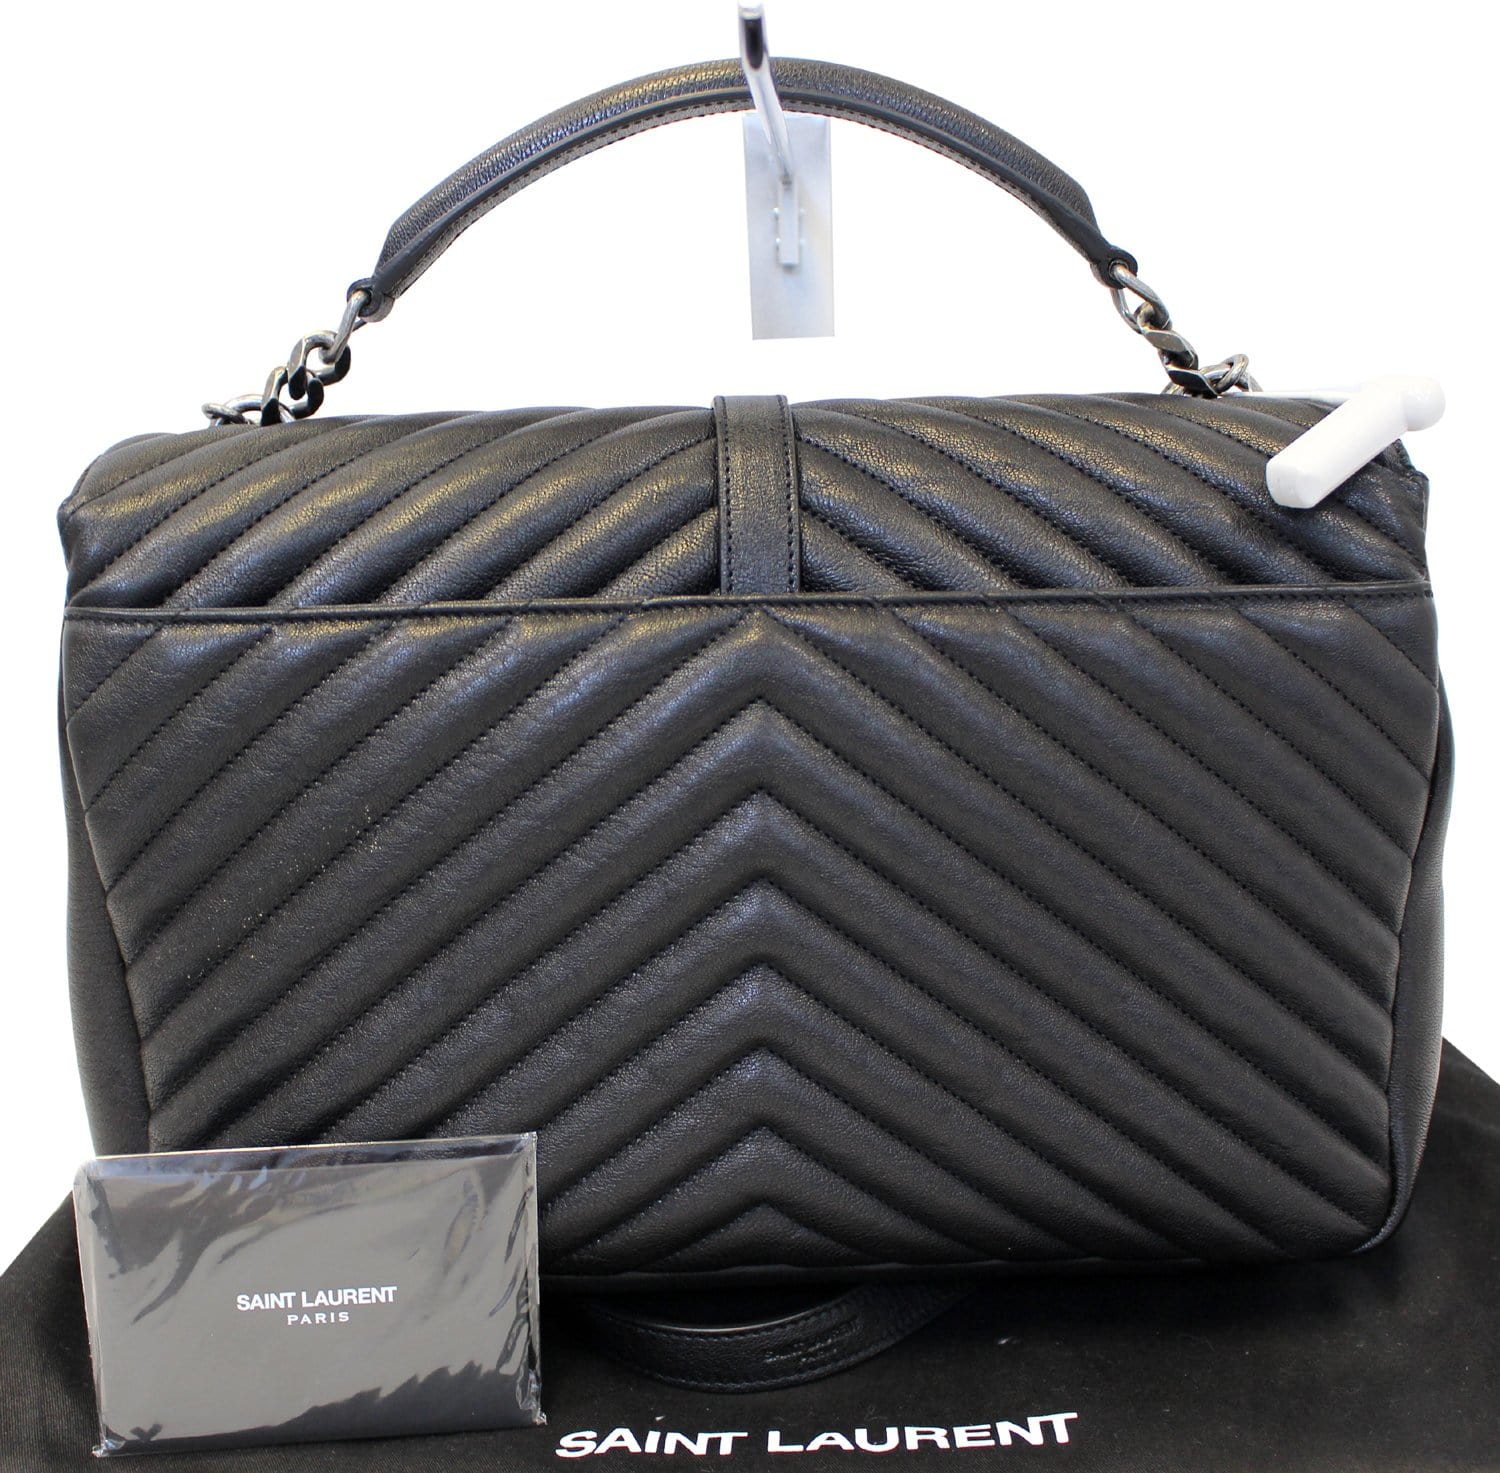 Yves Saint Laurent Grey Chevron Quilted Calfskin Leather Monogram Large College Bag